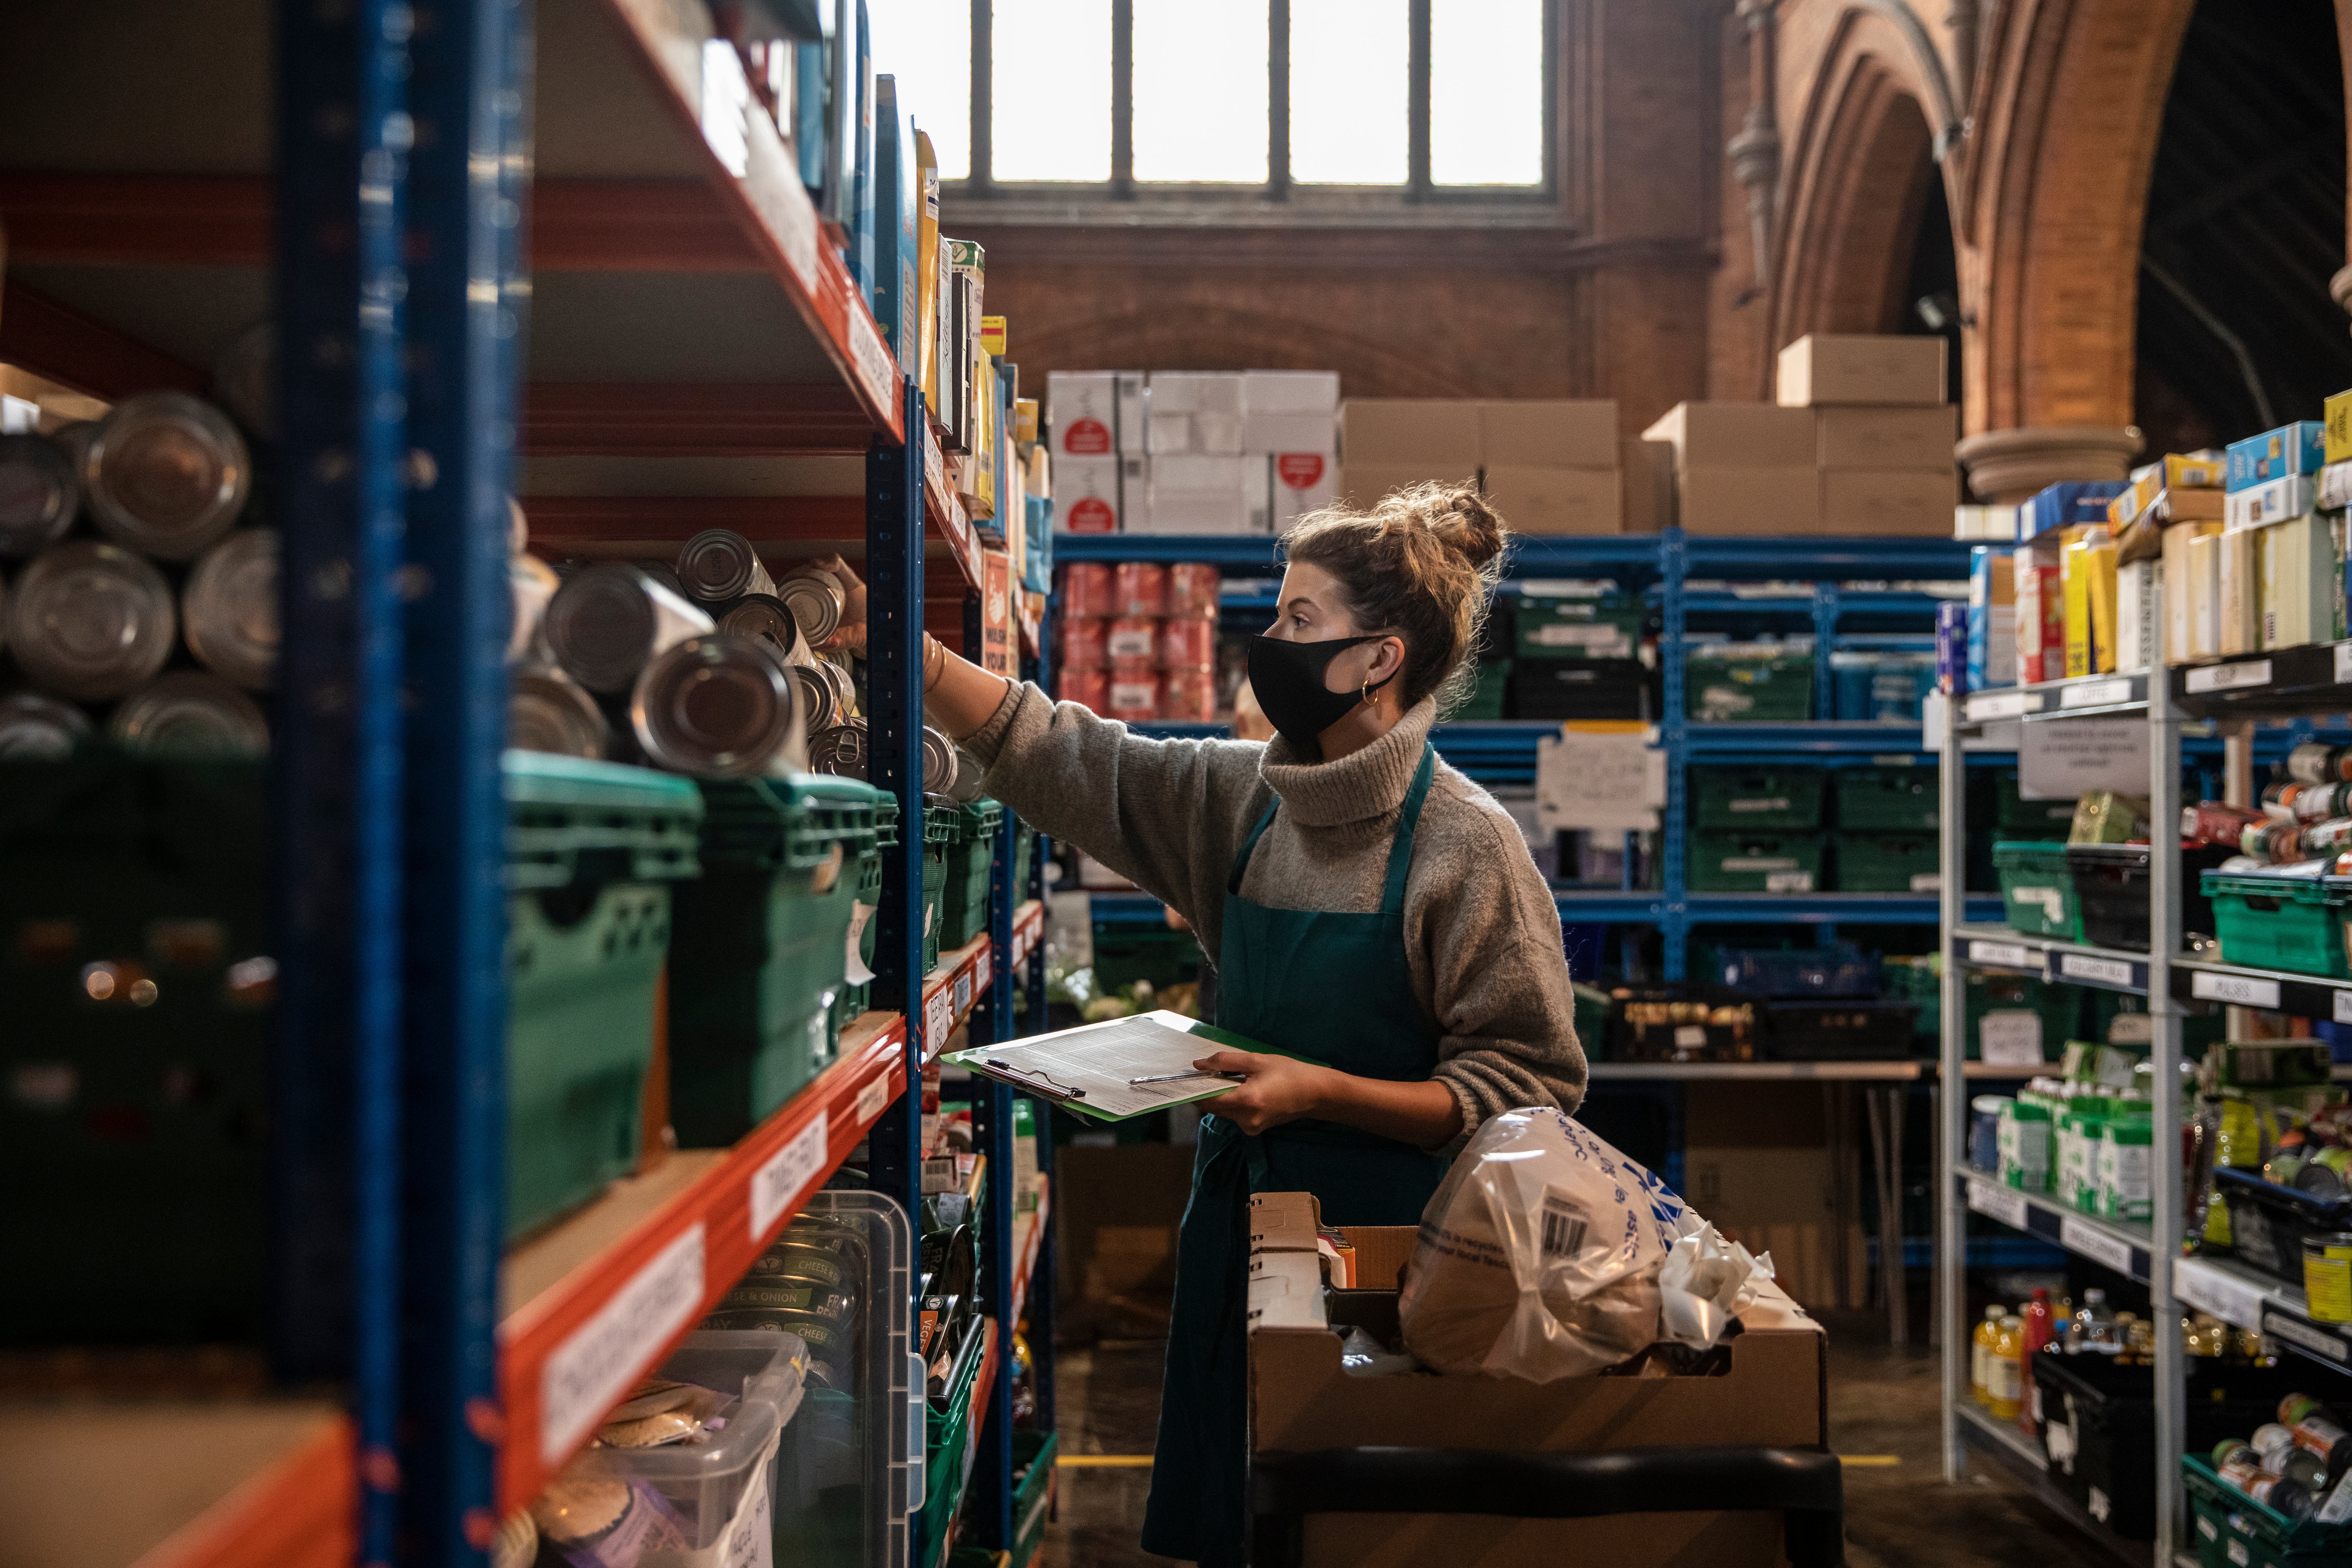 Staff and volunteers pack and prepare food parcels at the south London warehouse and distribution centre at St Margaret’s Church